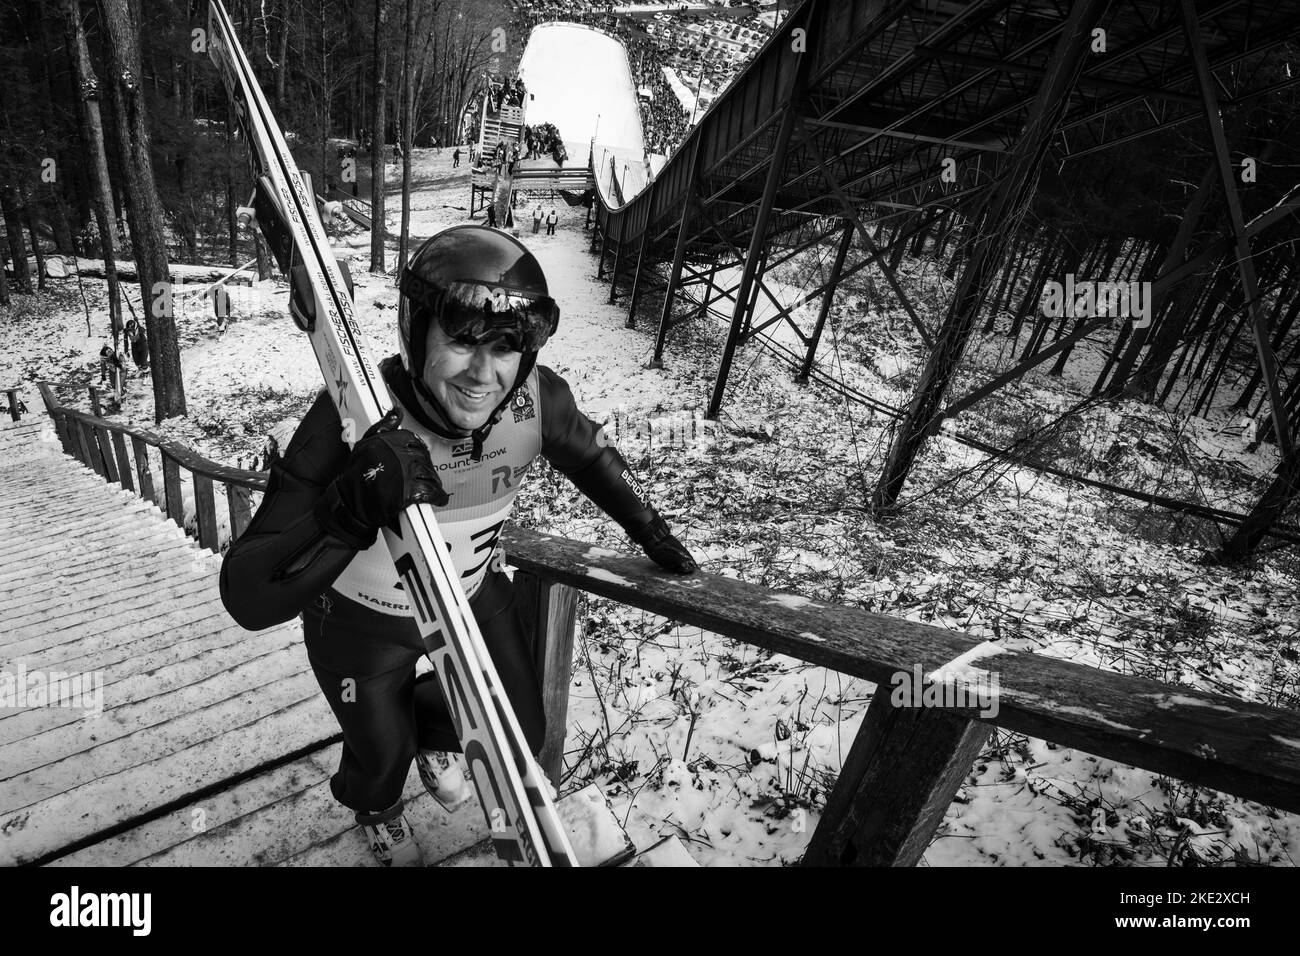 Ski jump Black and White Stock Photos and Images